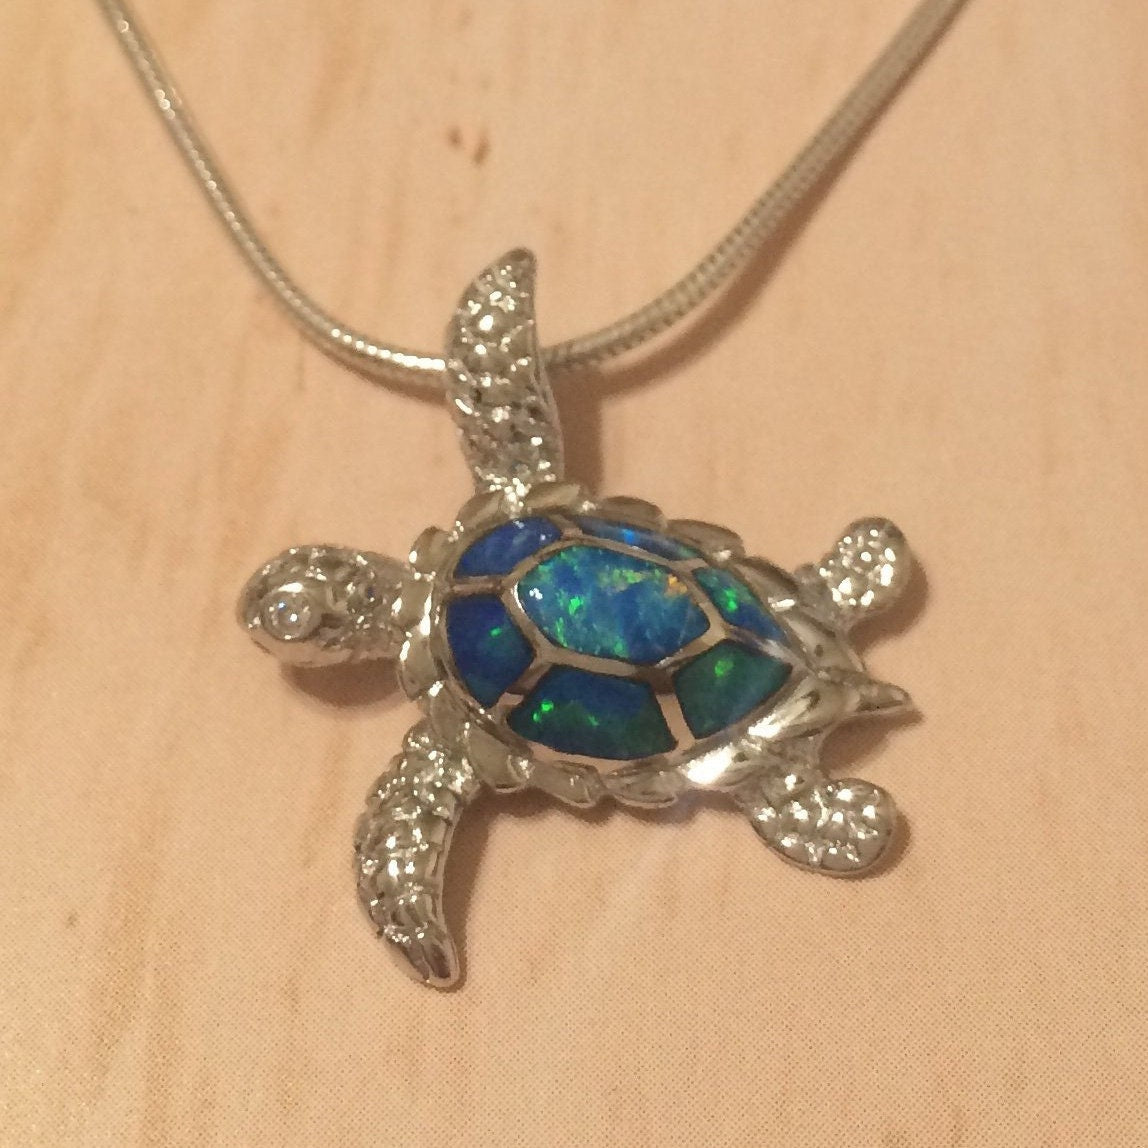 Jewelry, Sea Turtle Anklet New Free Gift Bag Host Pick